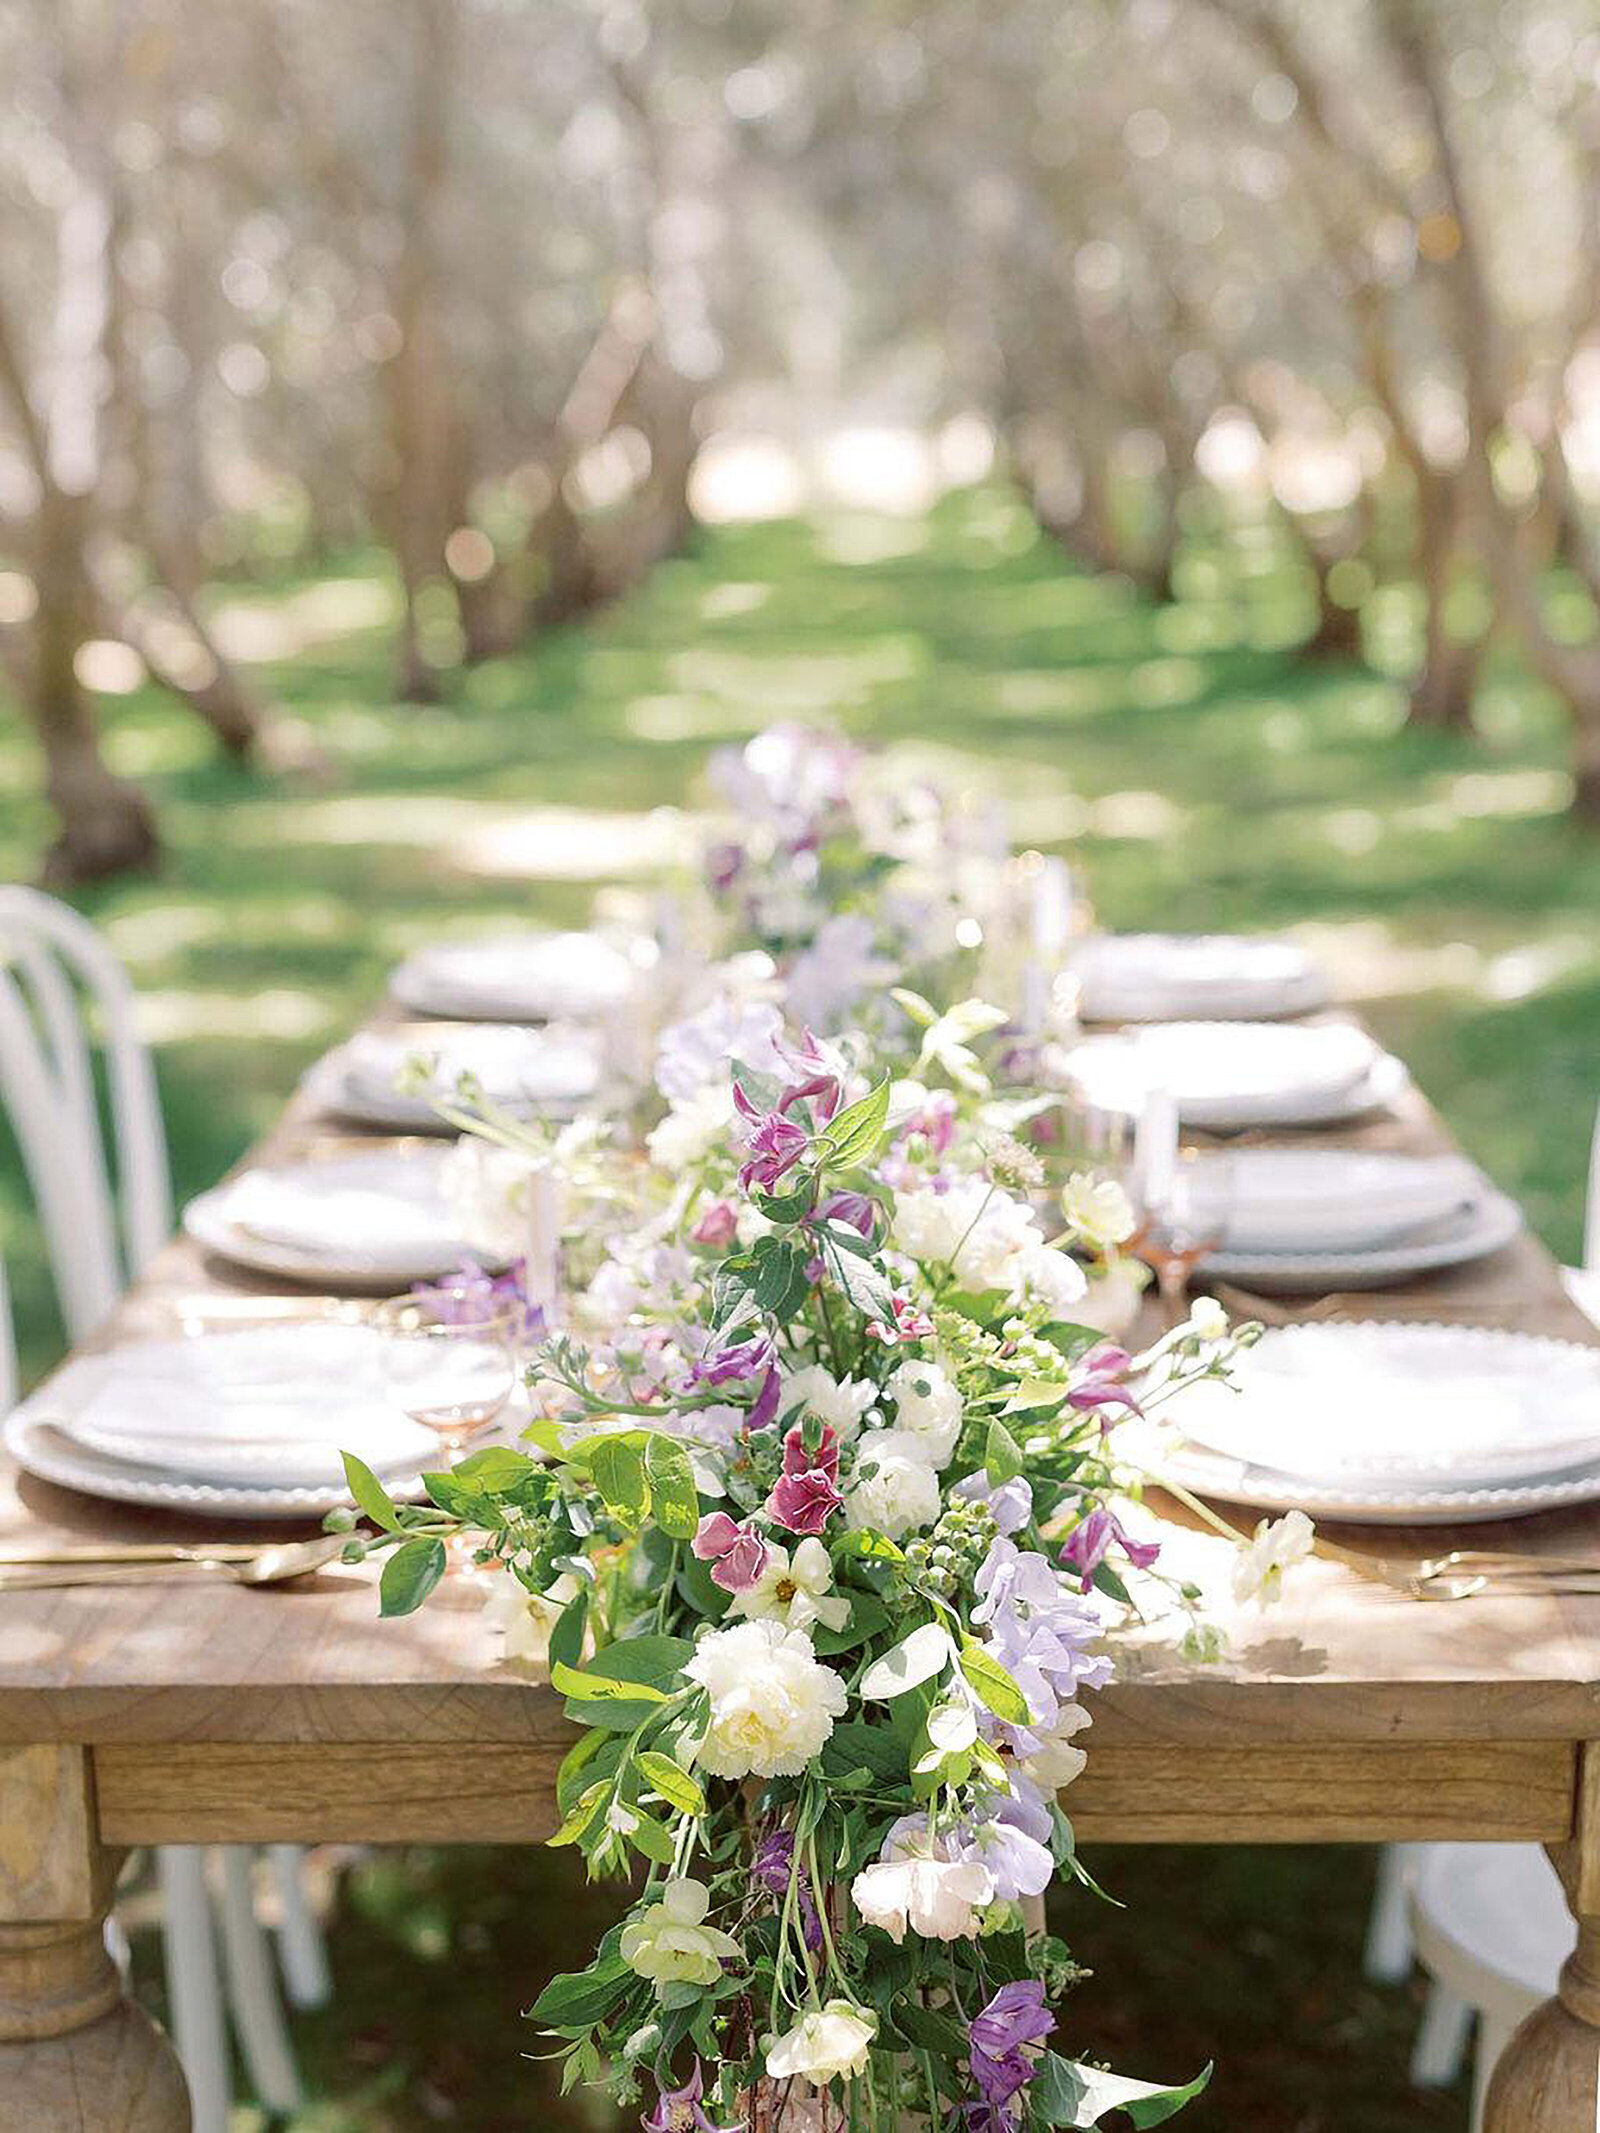 7-radiant-love-events-rustic-tablesetting-green-white-purple-floral-table-runner-wood-table-Temecula Table-updated-romantic-elegant-timeless